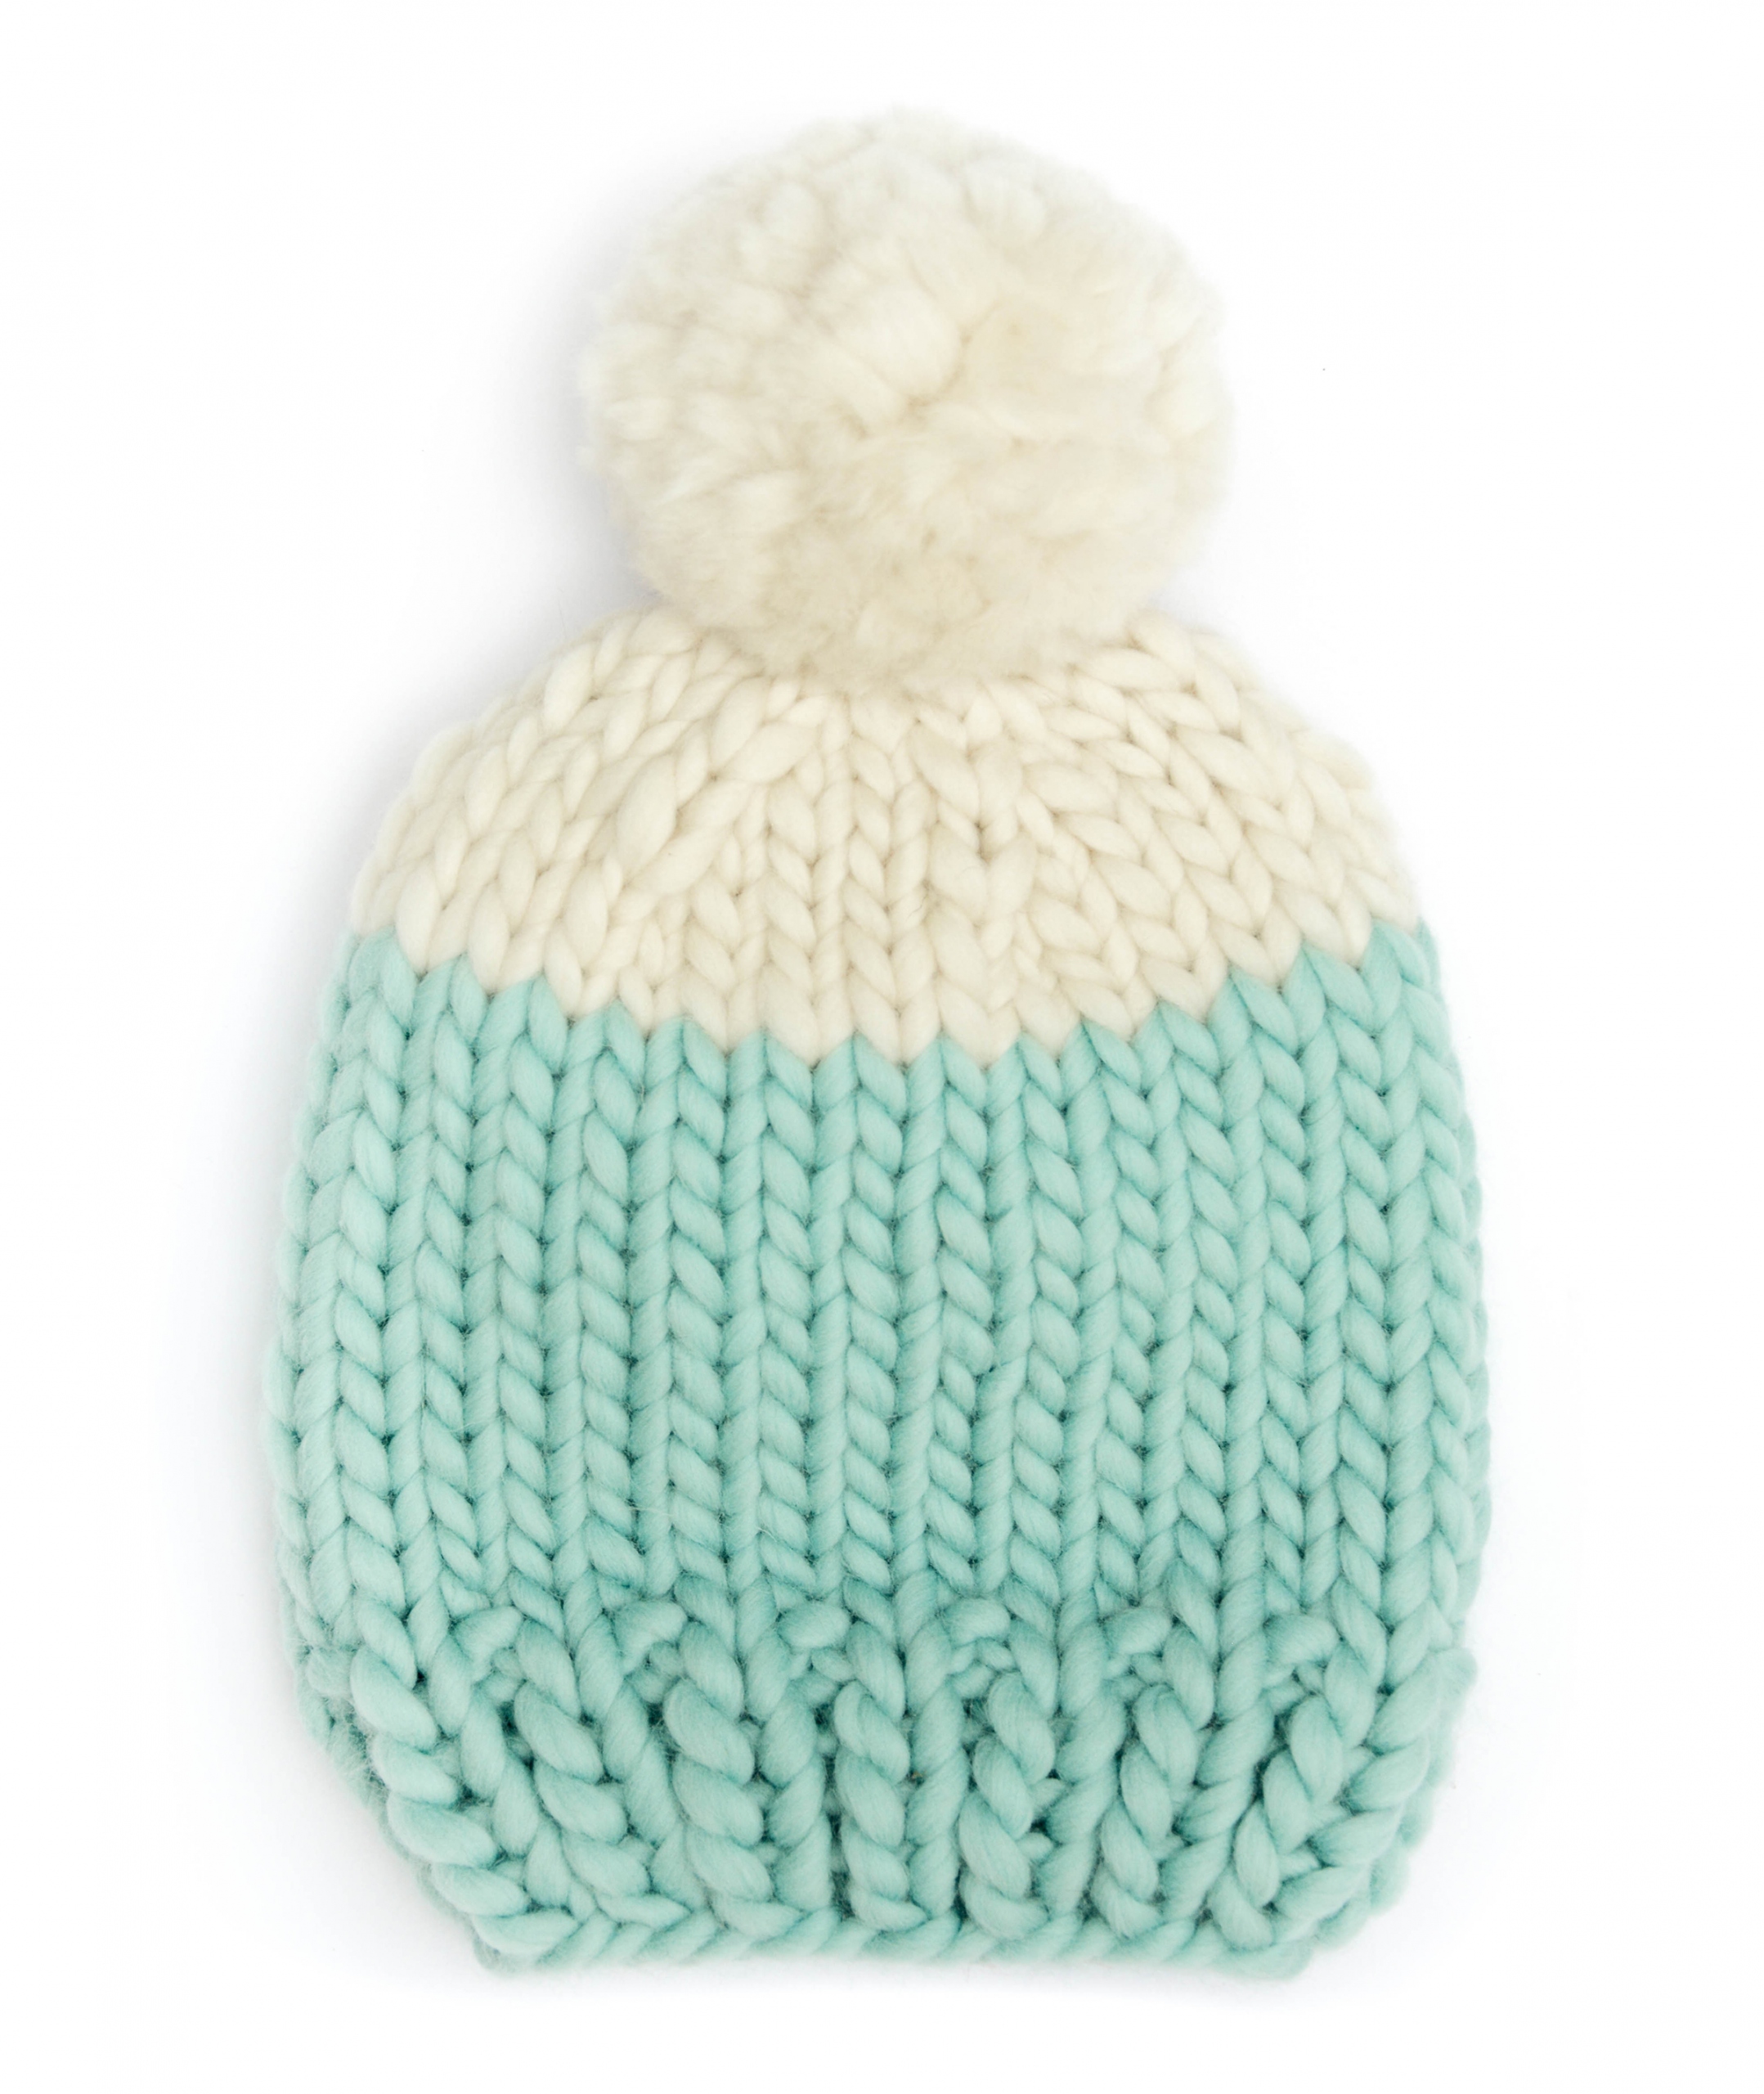 Handmade wool hats - Aqua and Ivory block colour bobble hat with Ivory pom pom. Click to customise.